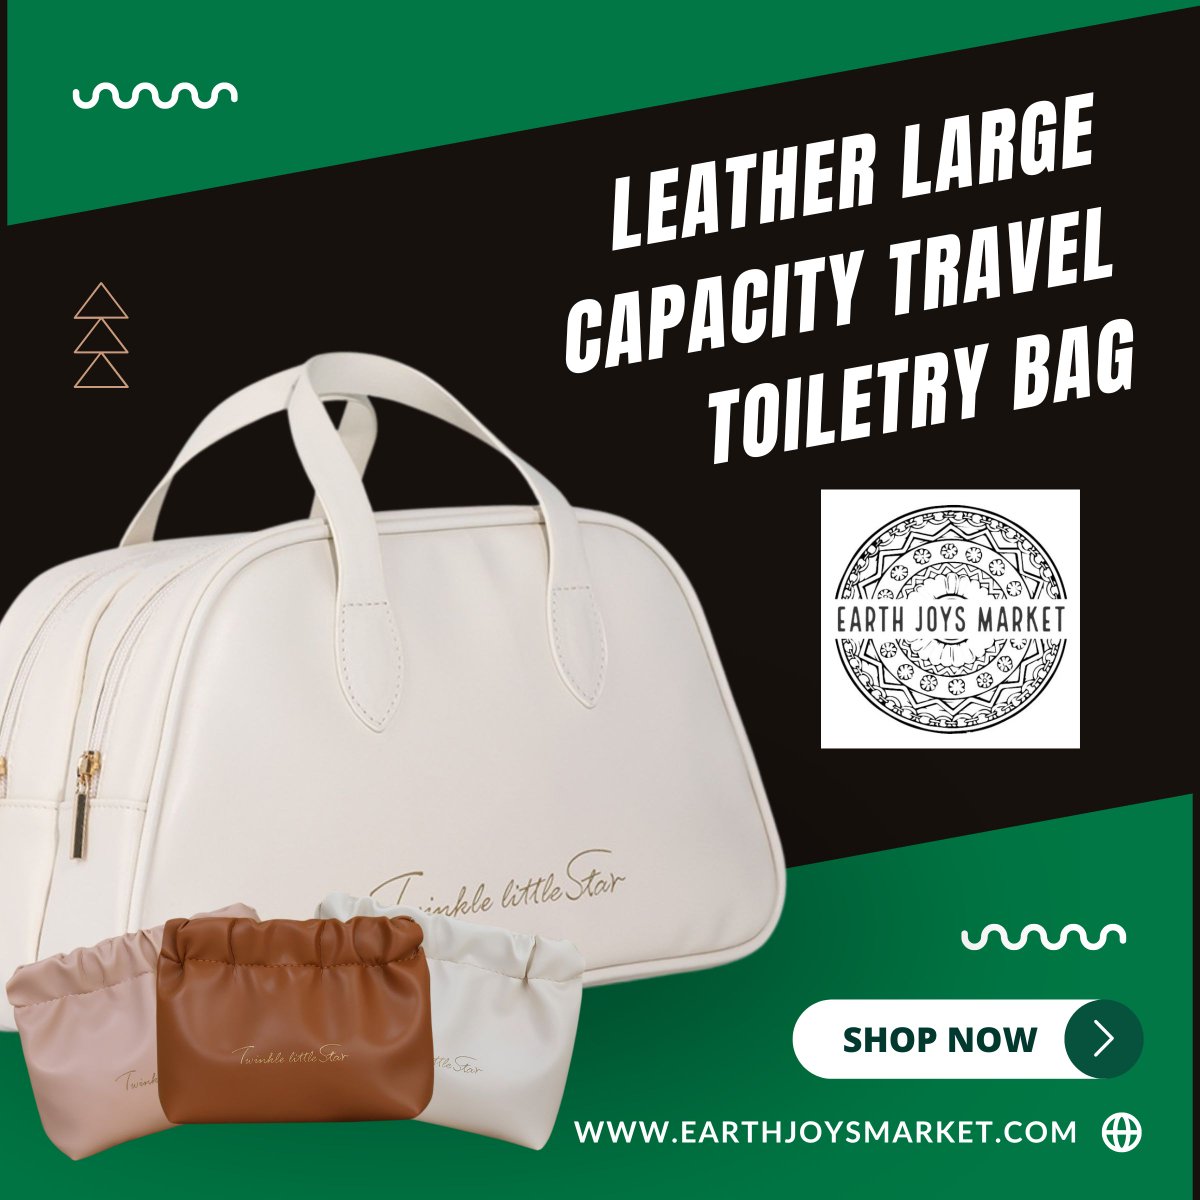 ✈️ Travel in style and stay organized with our Leather Large Capacity Travel Toiletry Bag from Earth Joys Market!
Shop Now: ➡ earthjoysmarket.com/product/leathe…

#EarthJoysMarket #TravelEssentials #ToiletryBag #ShopOnline #onlineshop #Amazon #amazon #daraz #darazmall #alibaba #USA